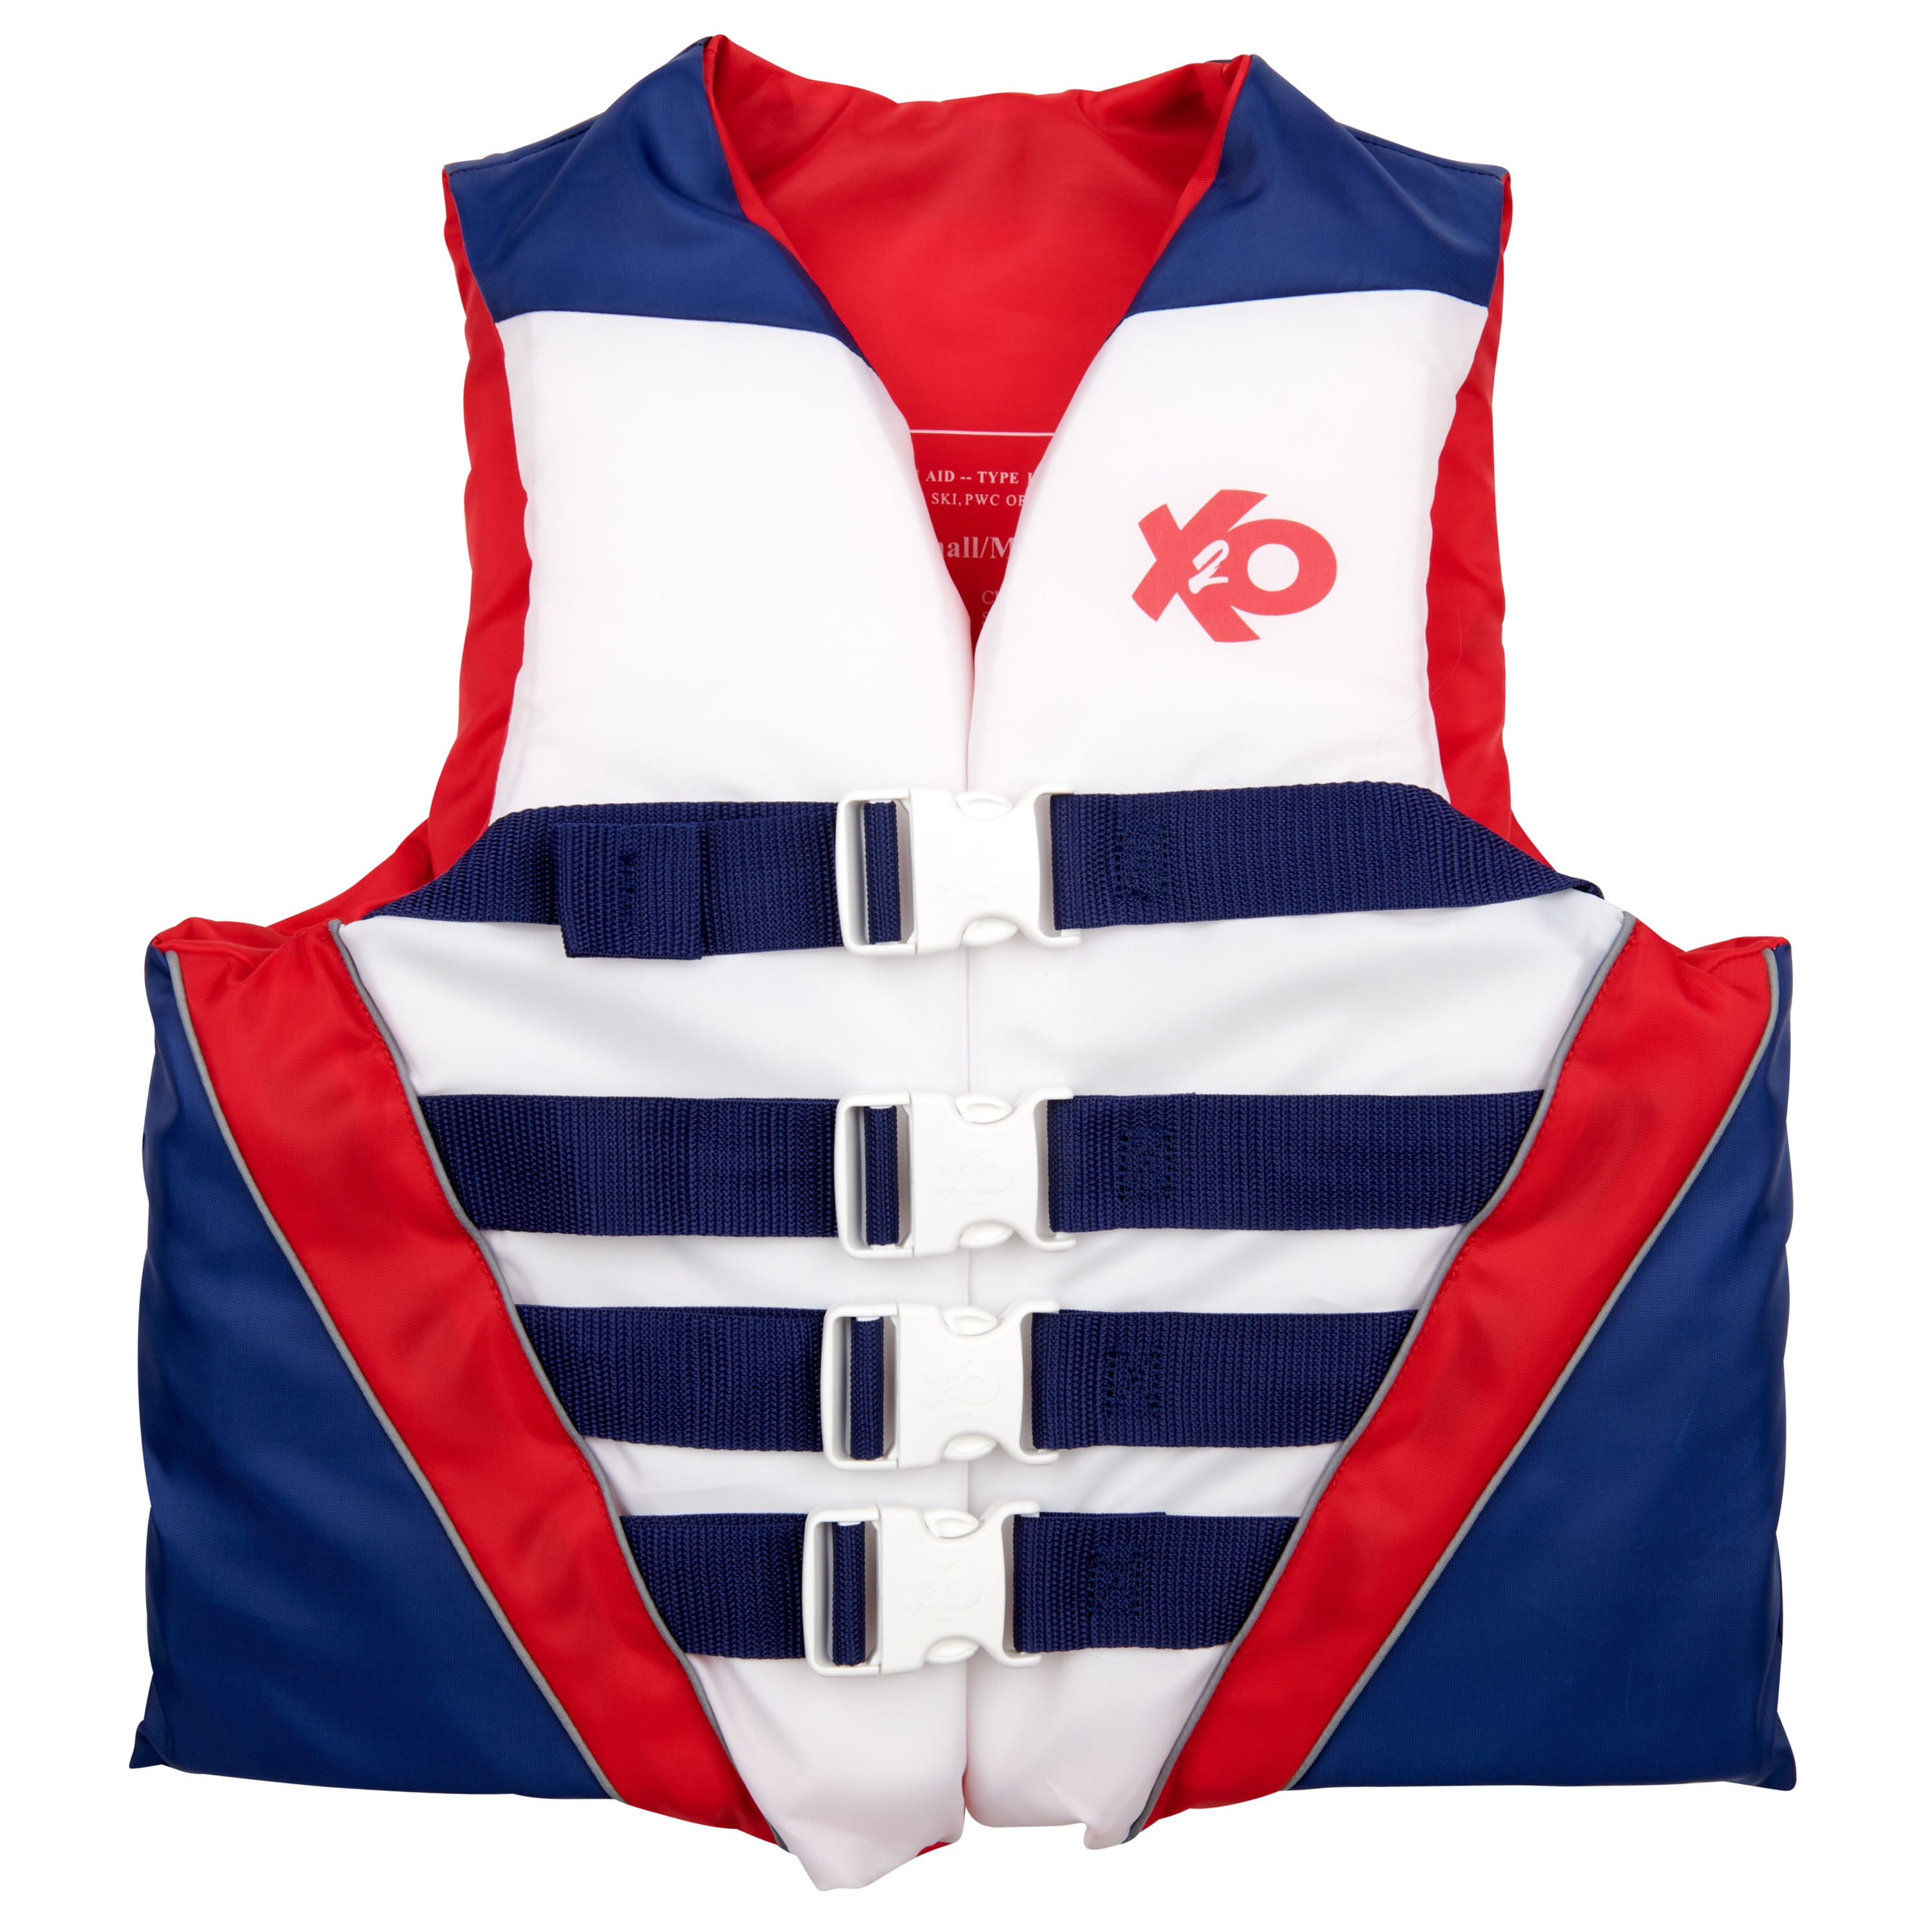 X2O Action 4 Buckle Life Vest and Jacket S/M Red, White, and Blue 